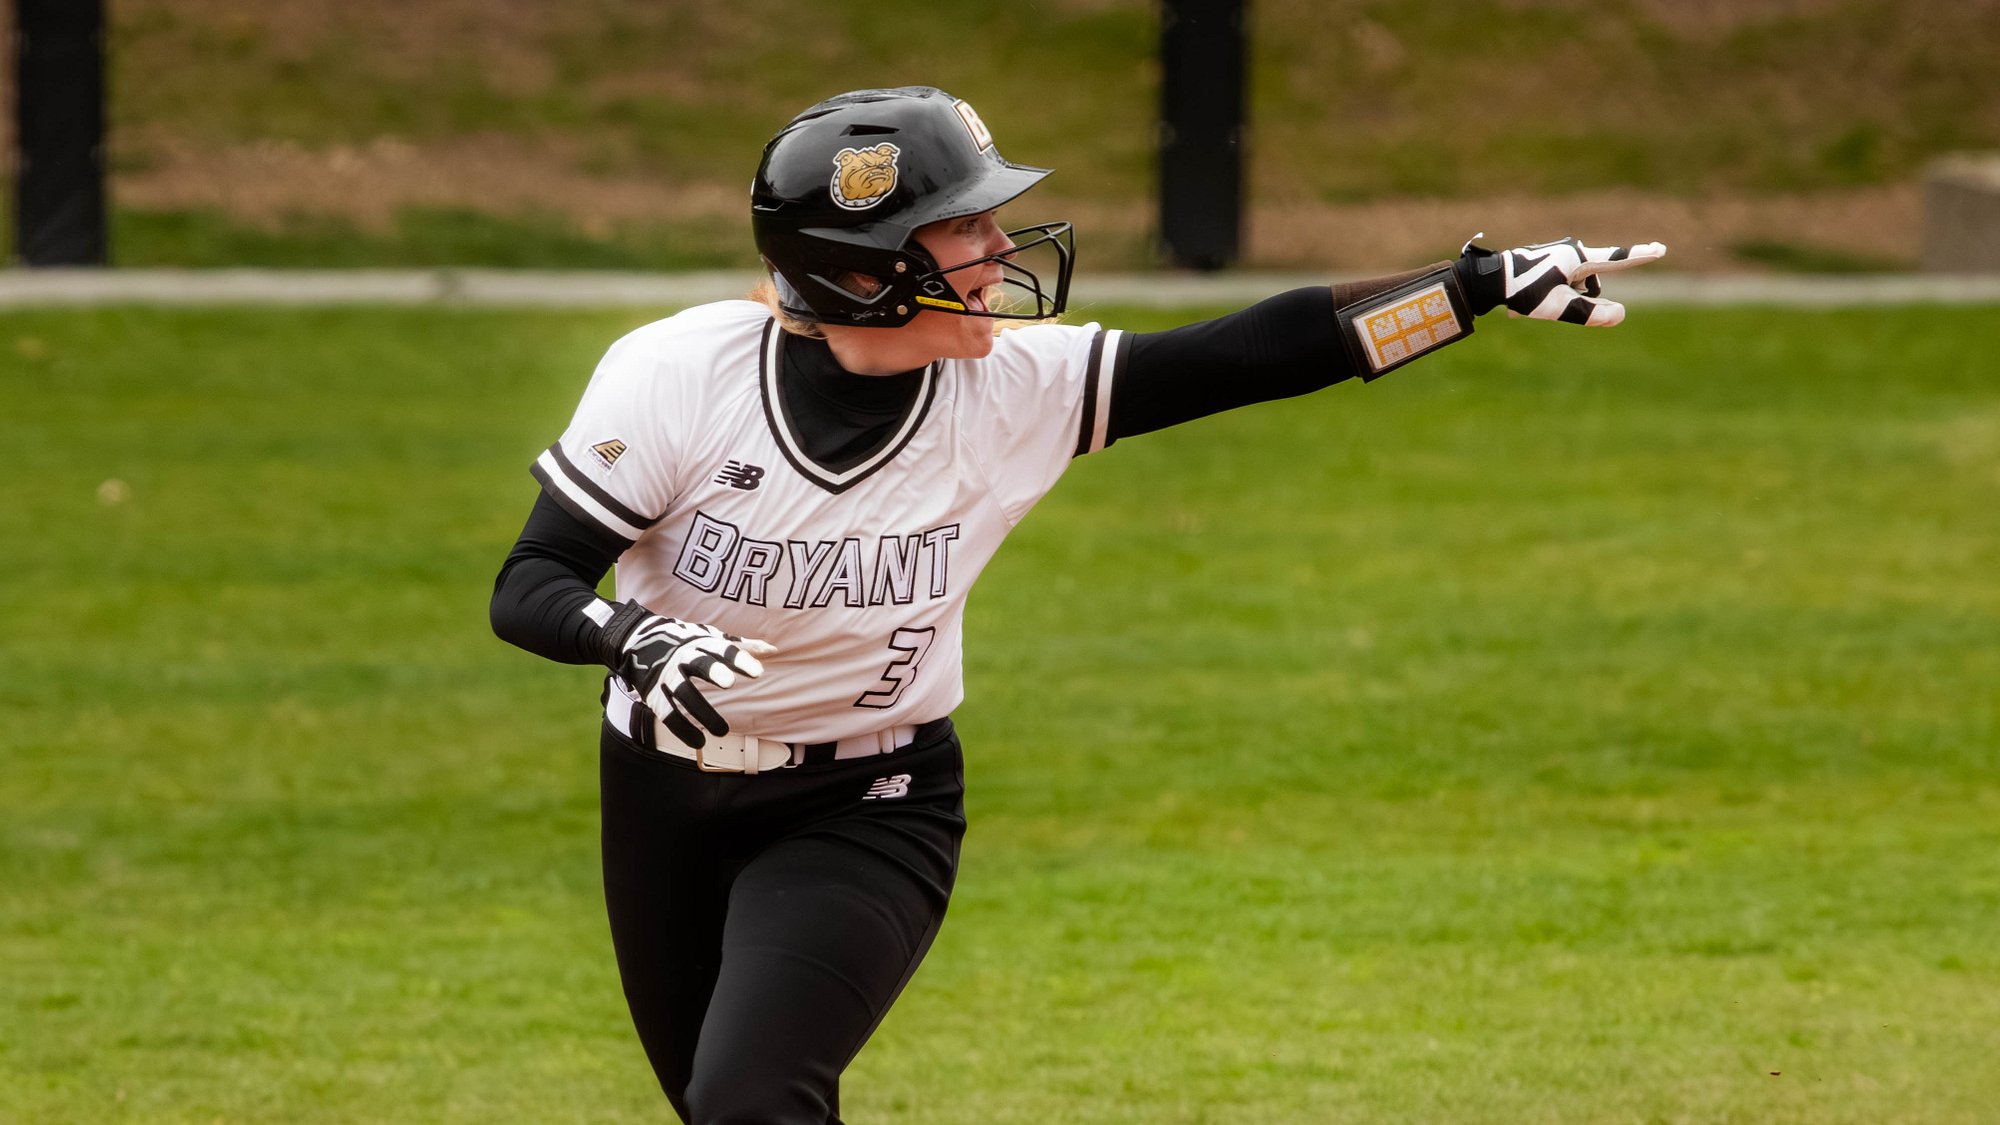 Hudson and Coleman hit HRs as Bryant sweeps UML on Sunday